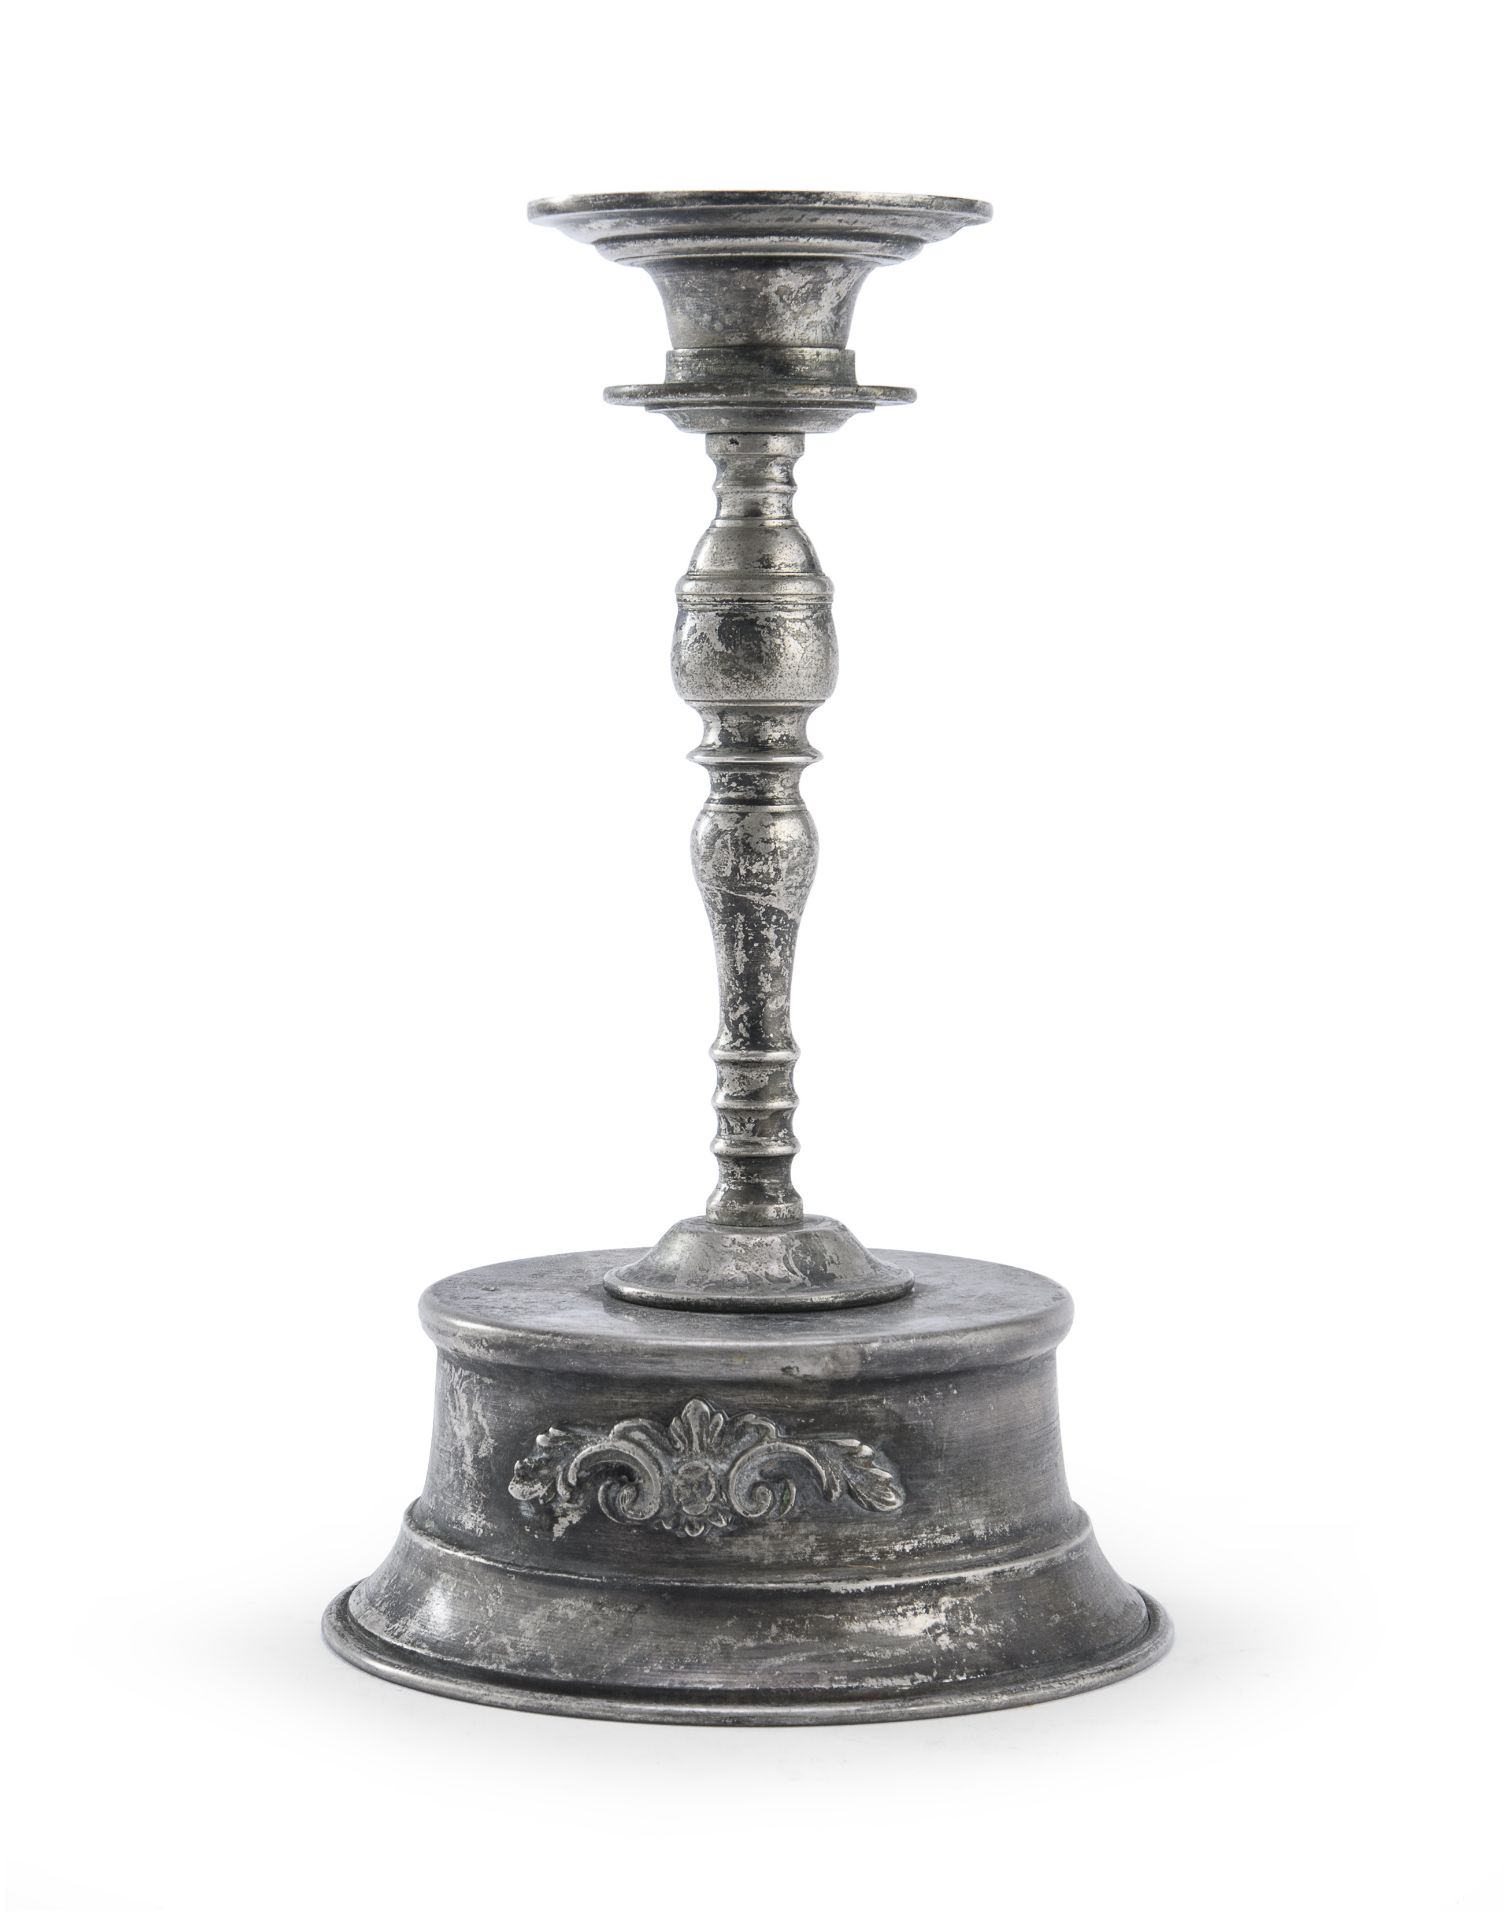 PEWTER CANDLE HOLDER 19TH CENTURY